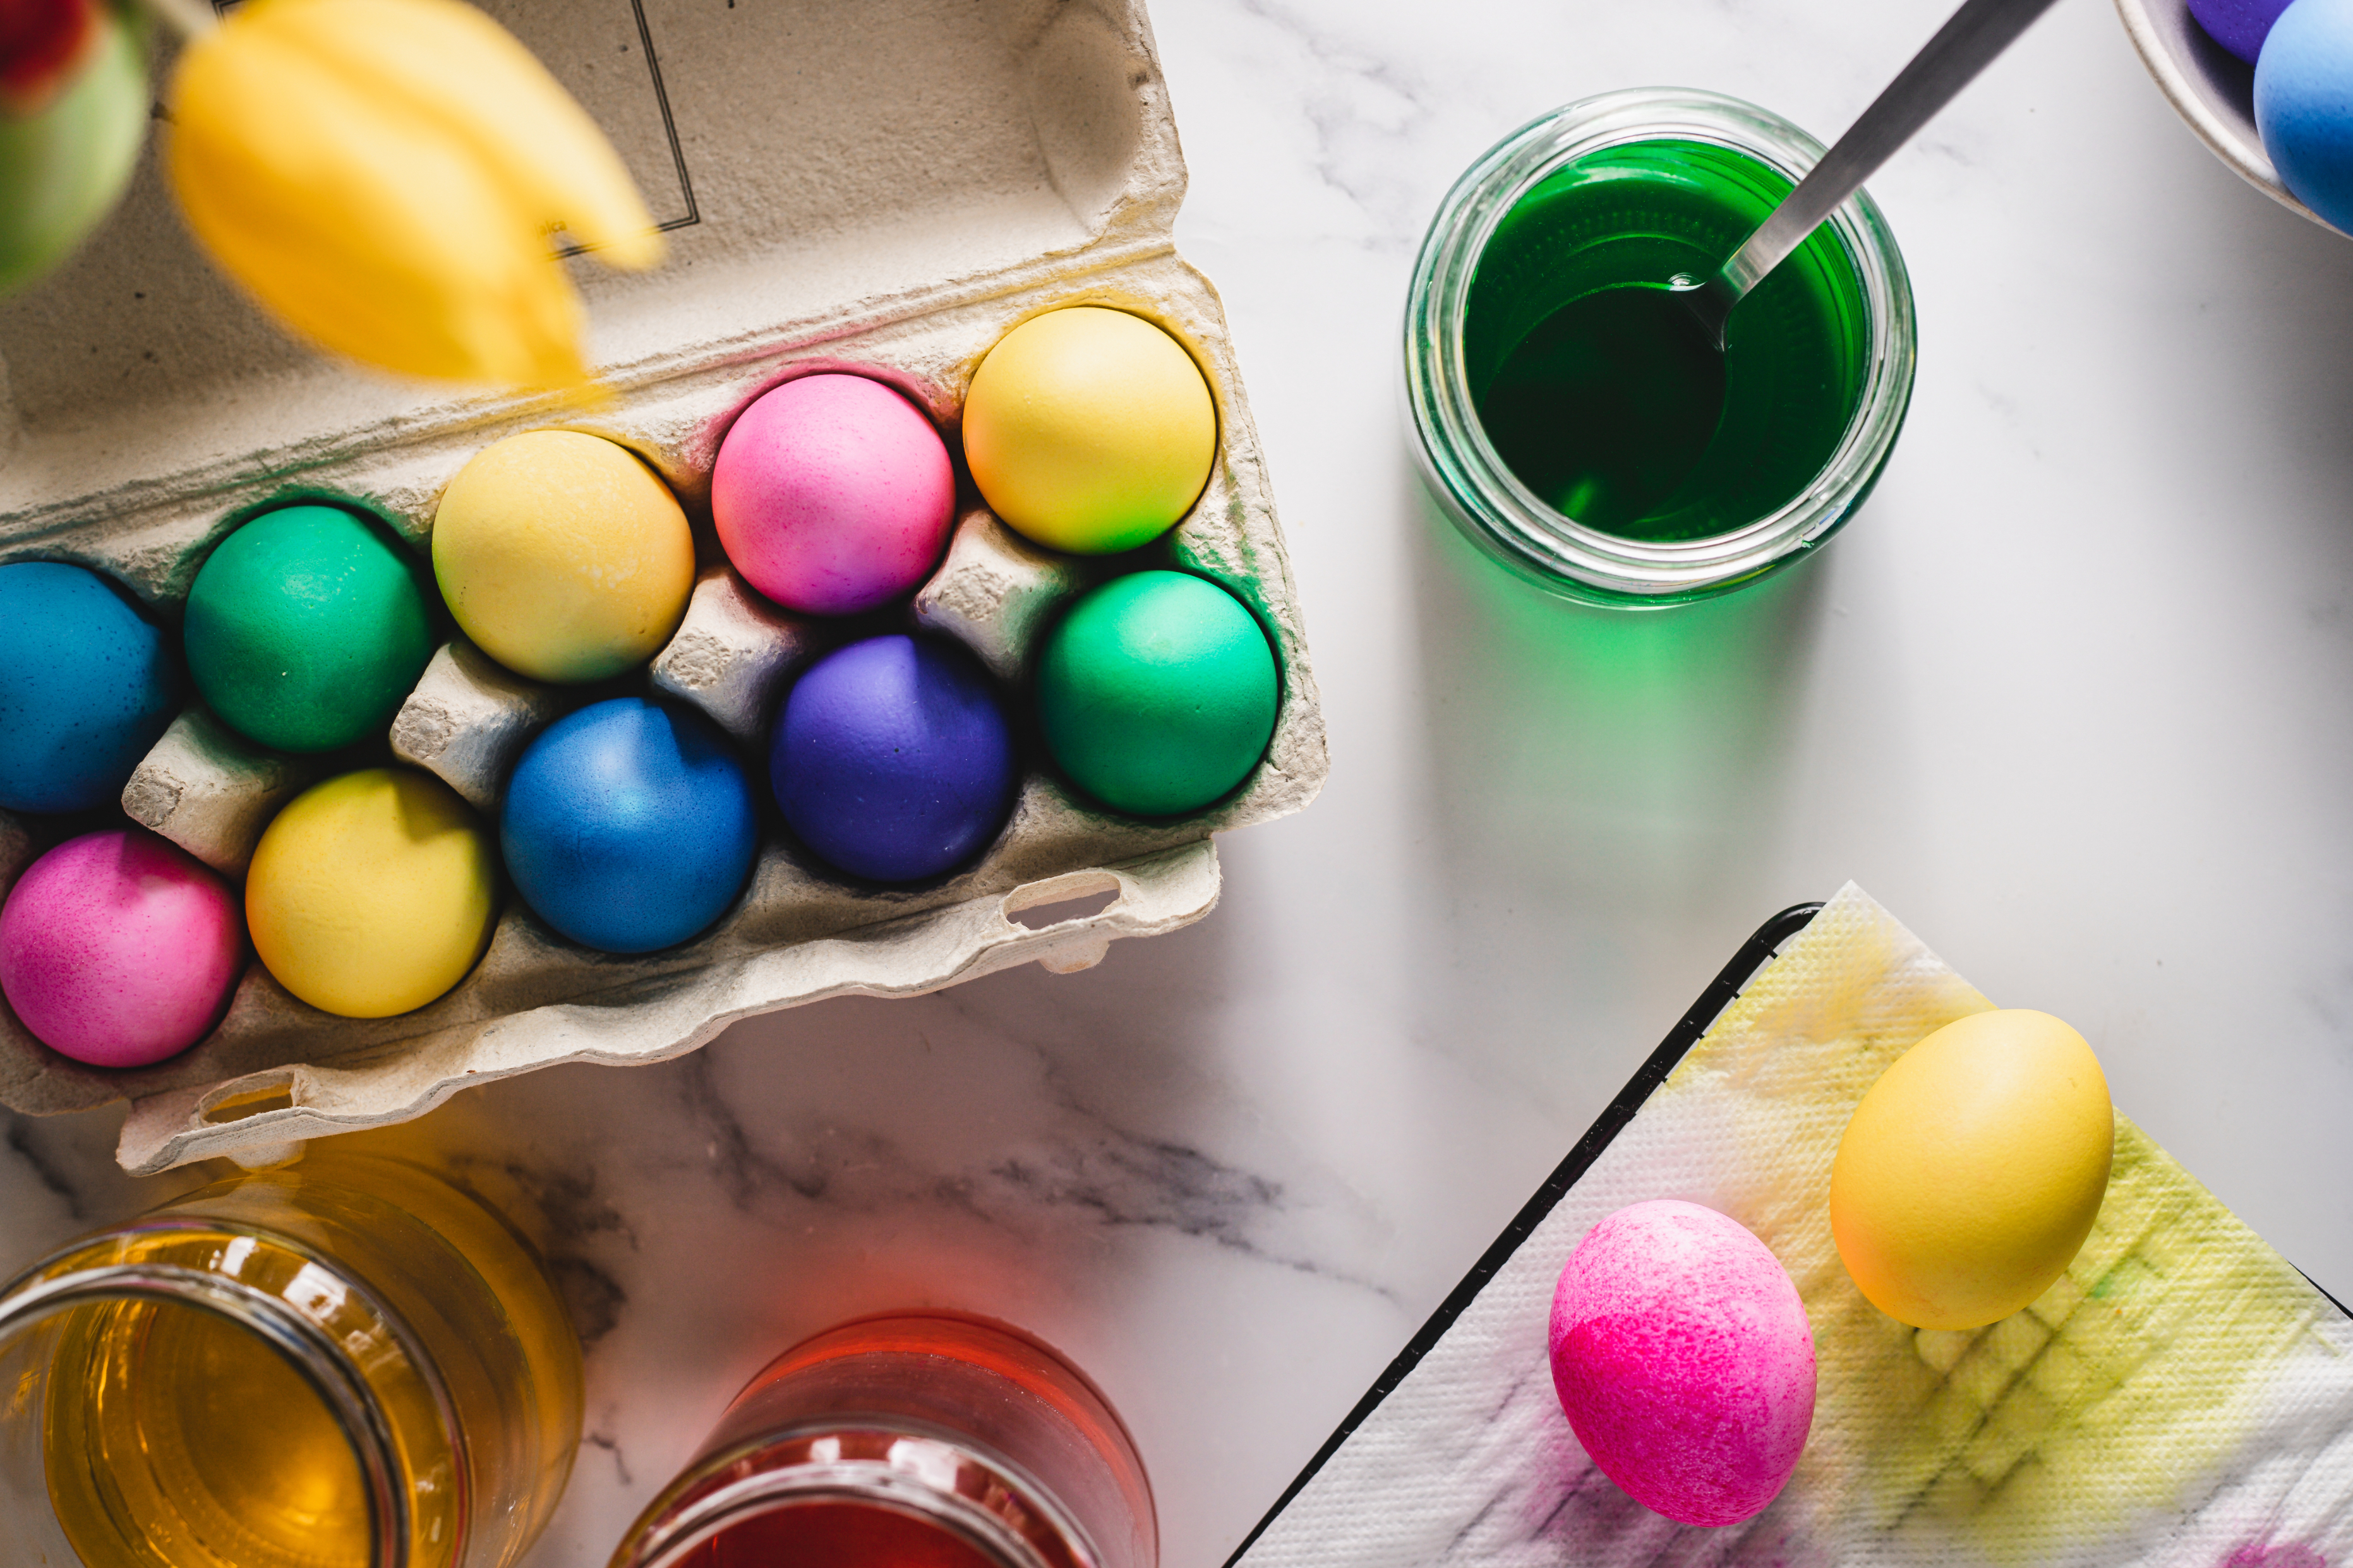 Easter eggs dyed in various colors in a carton, with cups of dye and a paintbrush nearby